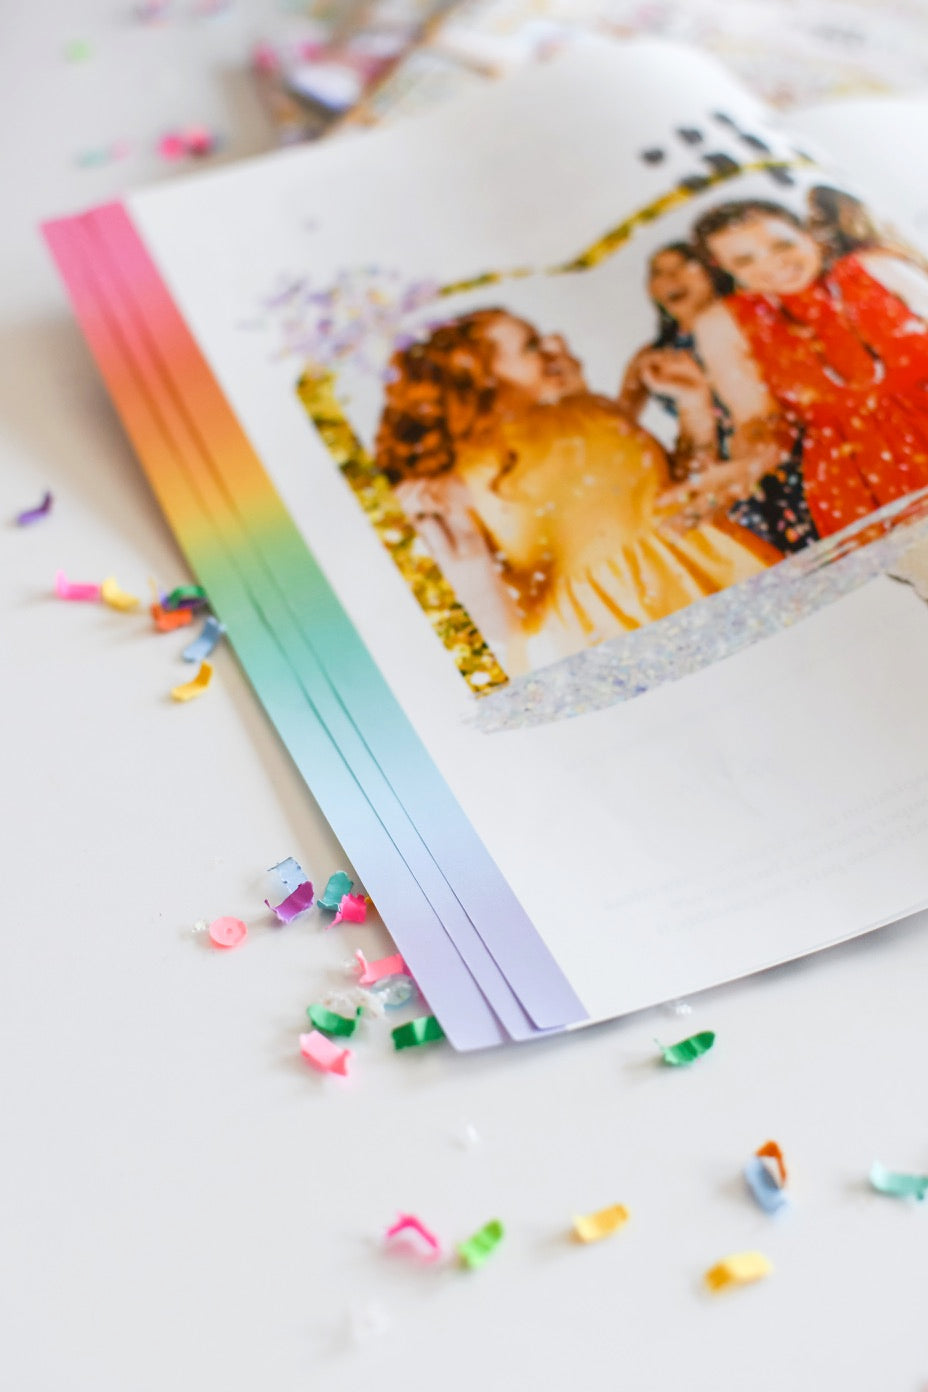 101 Things To Do With Confetti Magazine